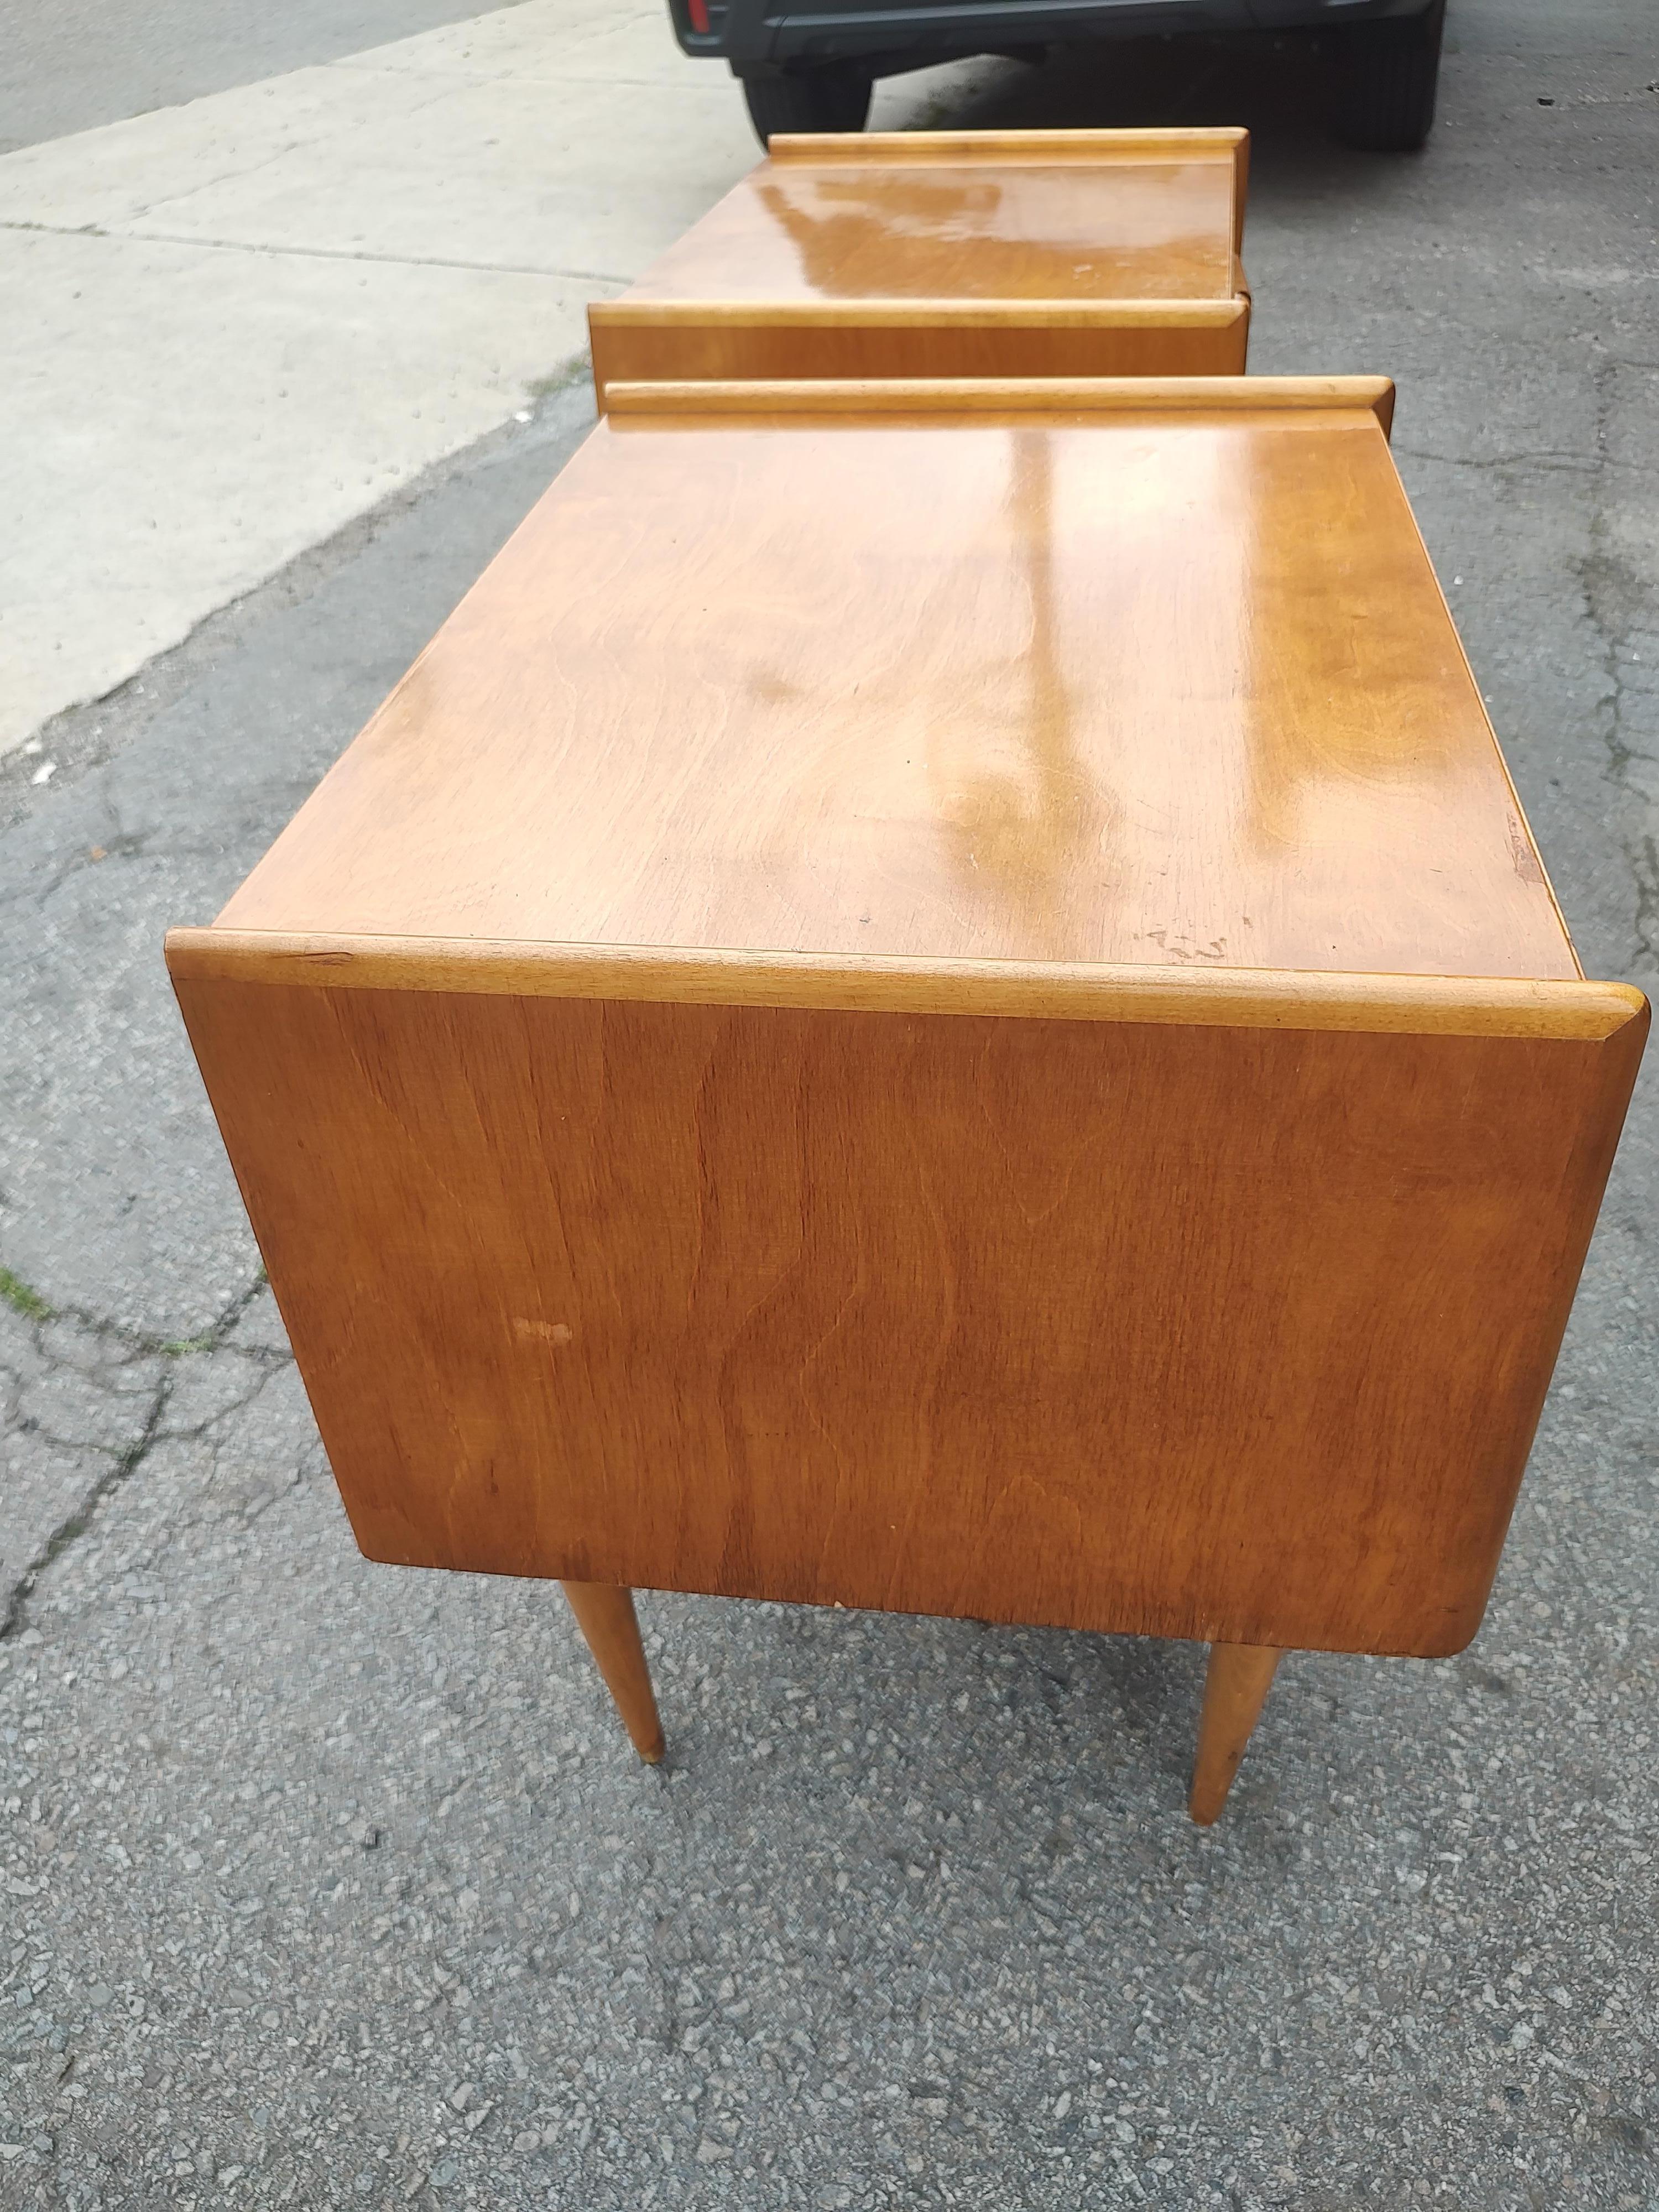 Pair of Mid Century Modern Night Stands in Birch by Edmond Spence Sweden C1953 For Sale 5